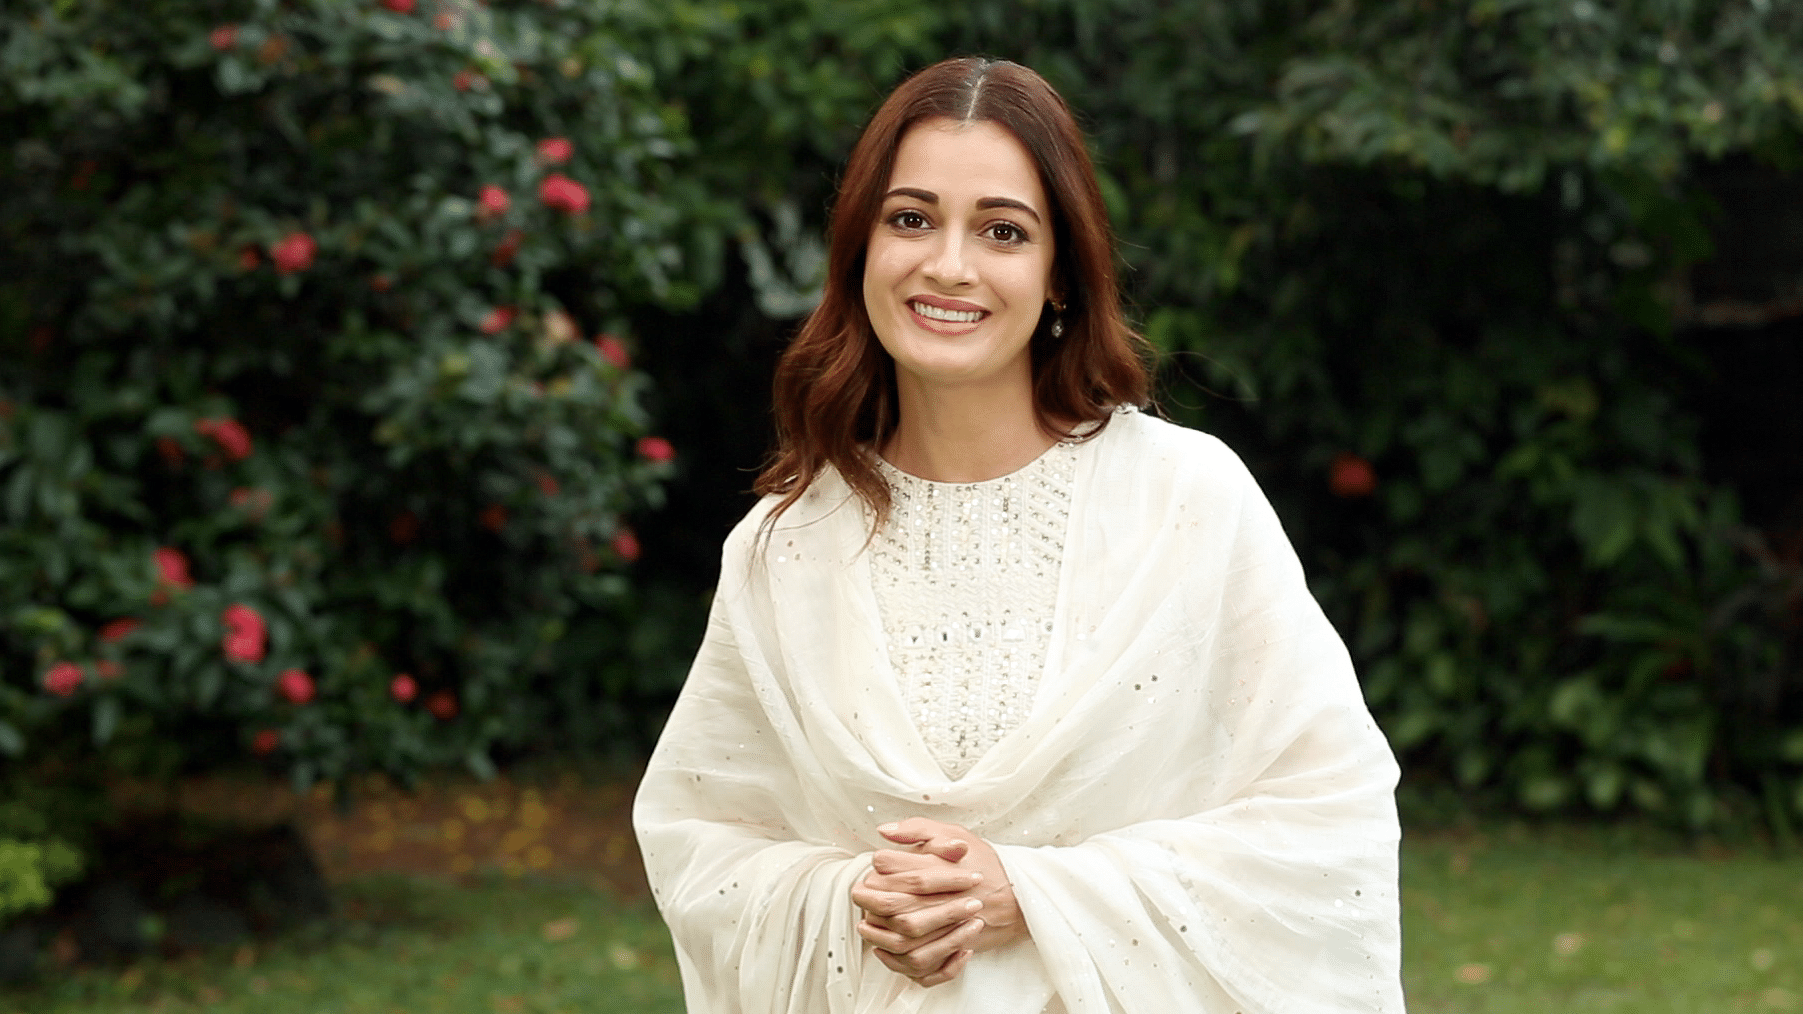 After a troubling 2019, Dia Mirza hopes for a stronger 2020